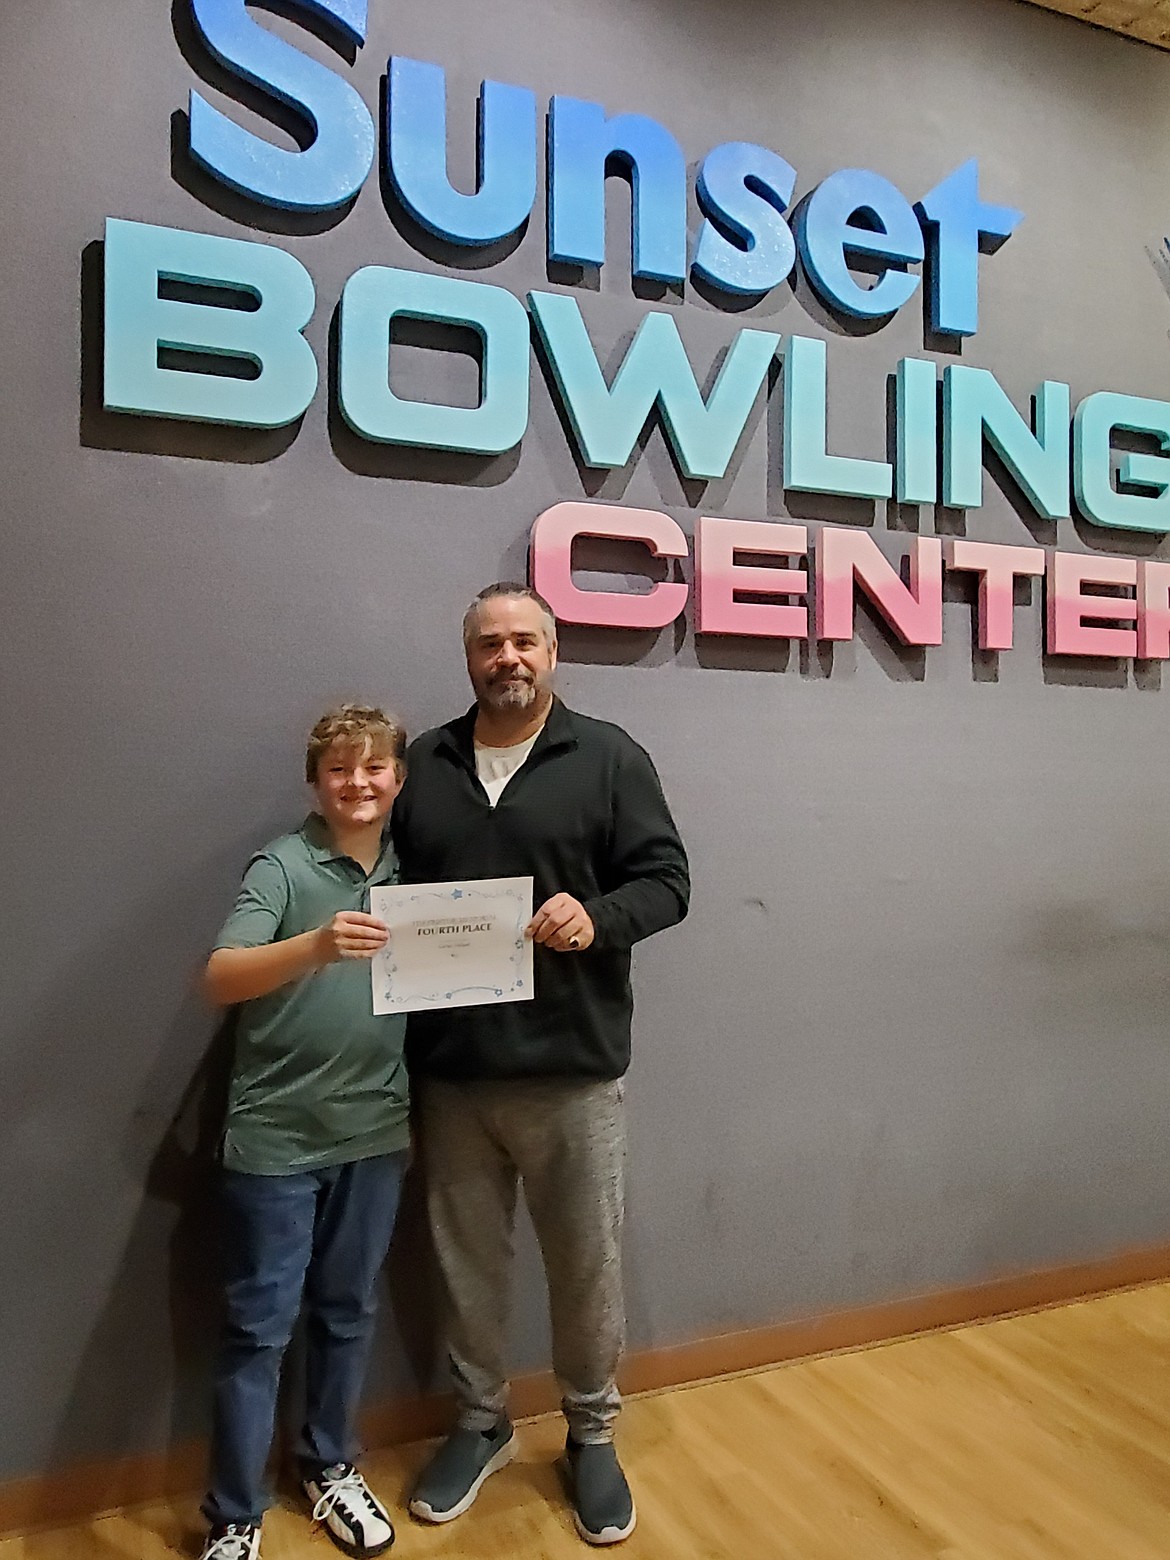 Courtesy photo
The 7th annual Tim Fristoe Youth/Adult Tournament was held Sunday at Sunset Bowling Center in Coeur d'Alene. Fourth place went to Carter Hilliard, left, and Brian Hilliard. Carter Hilliard earned a $55 scholarship.